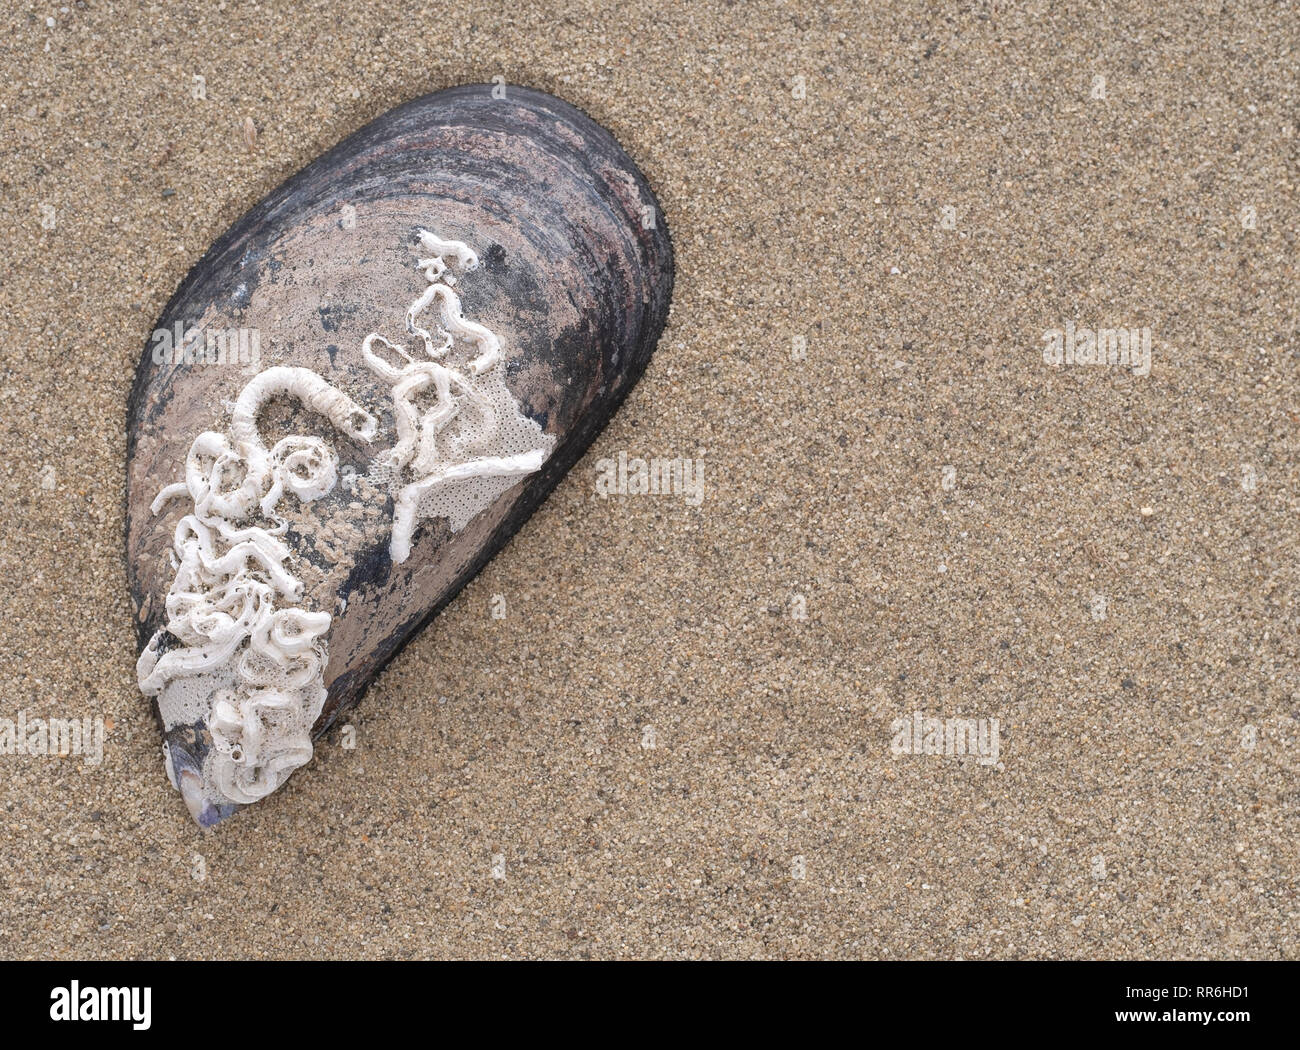 Mussel shell with natural calcareous tubes made by marine worms, like Pomatoceros species. Found on beach. Stock Photo